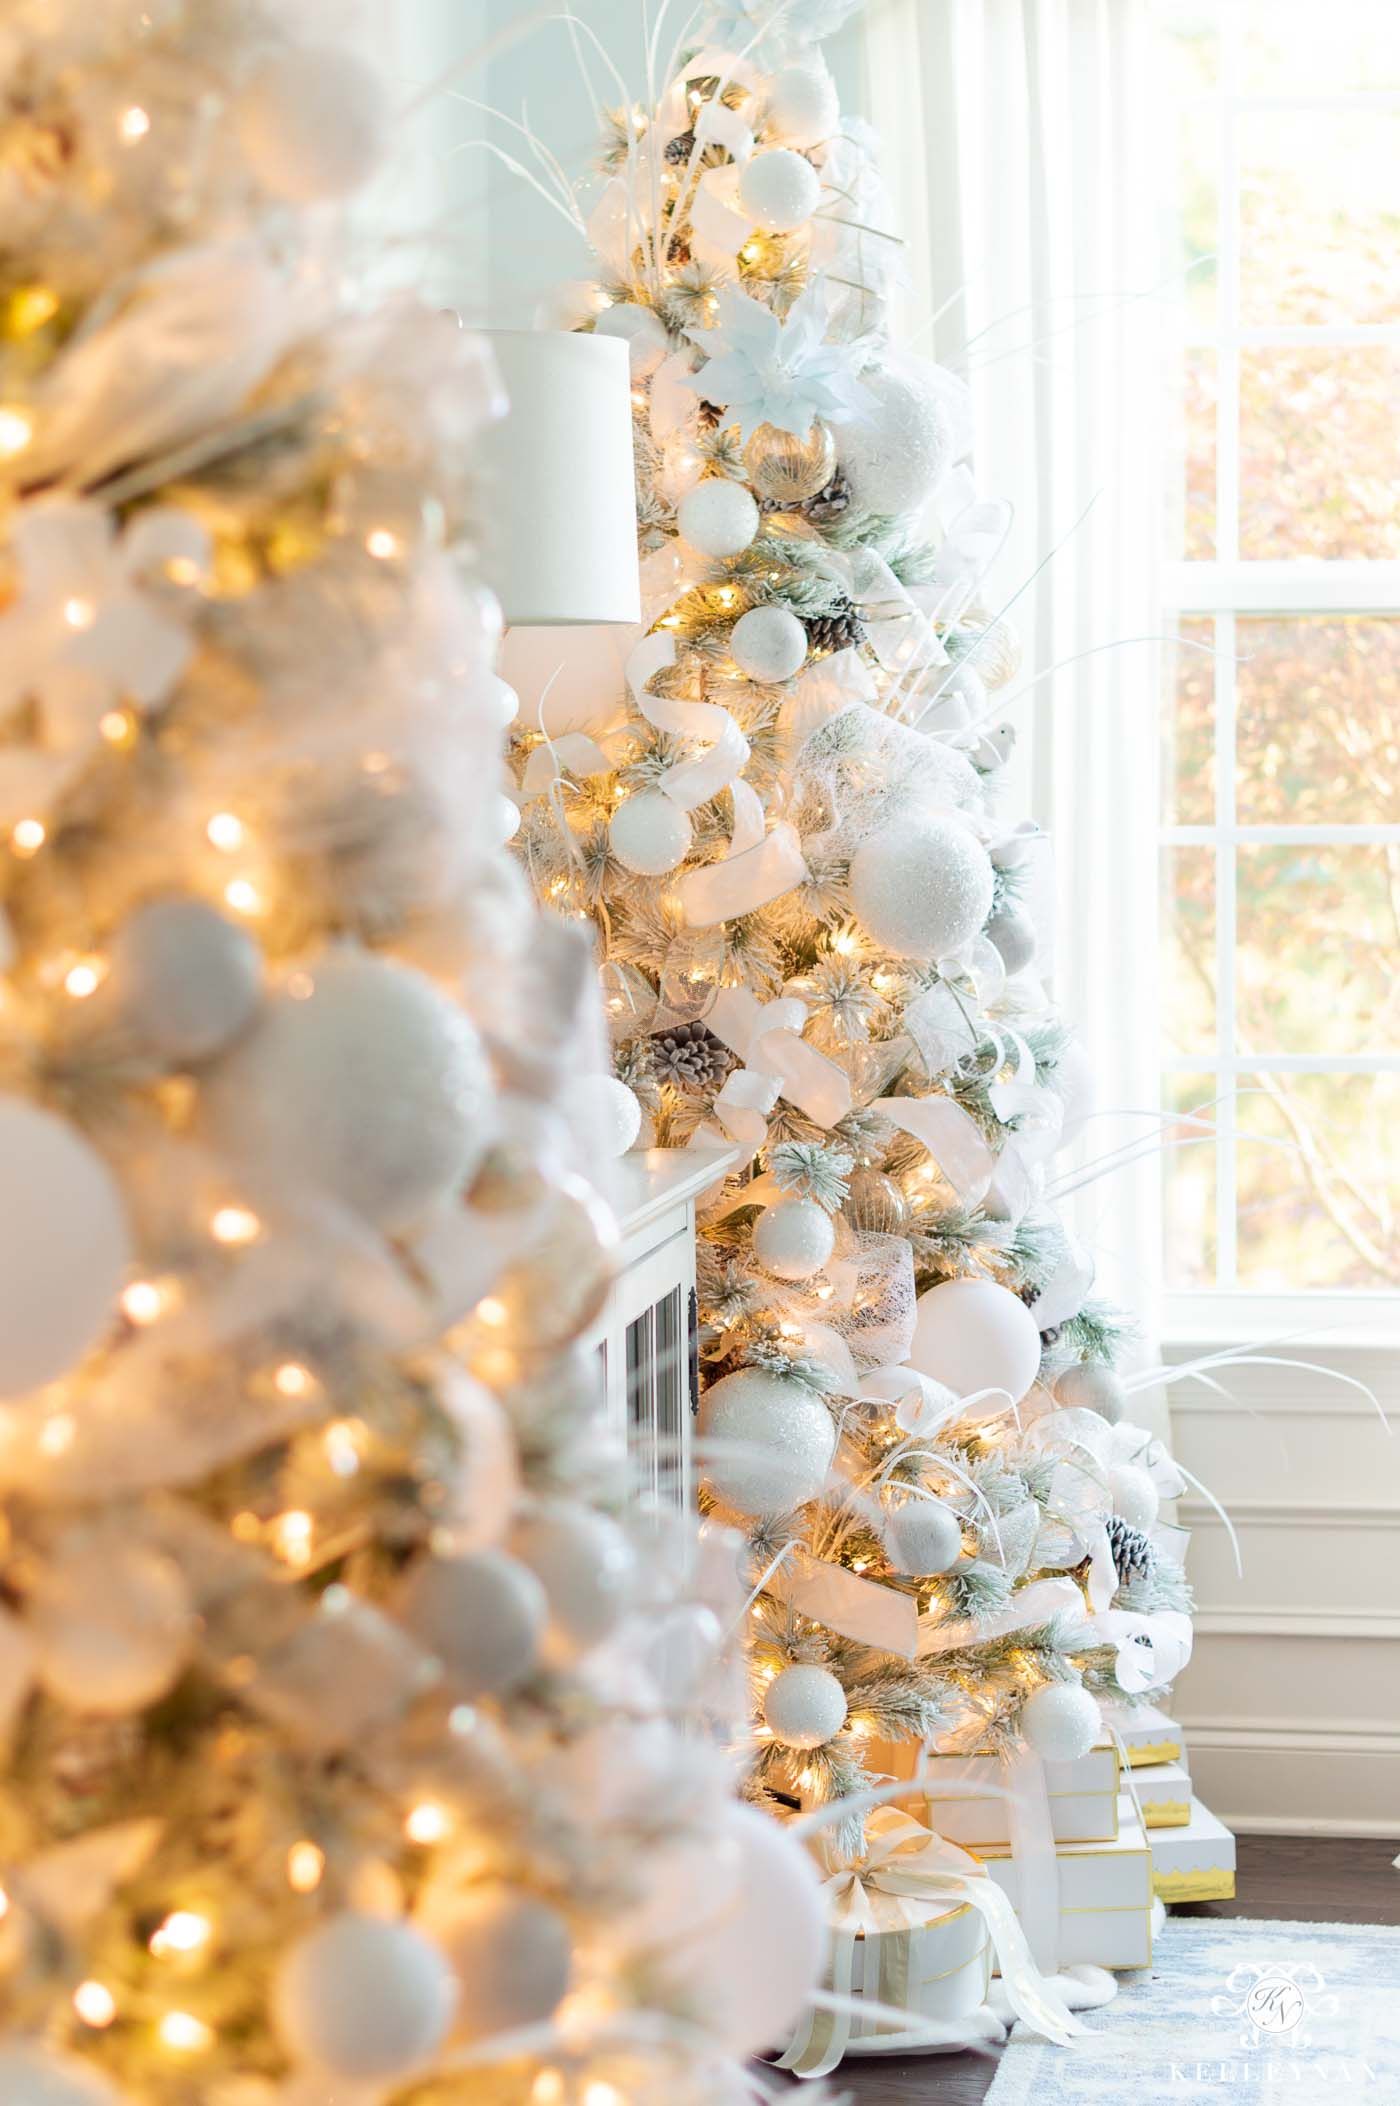 Use Gold Accents for Your Christmas Decorations